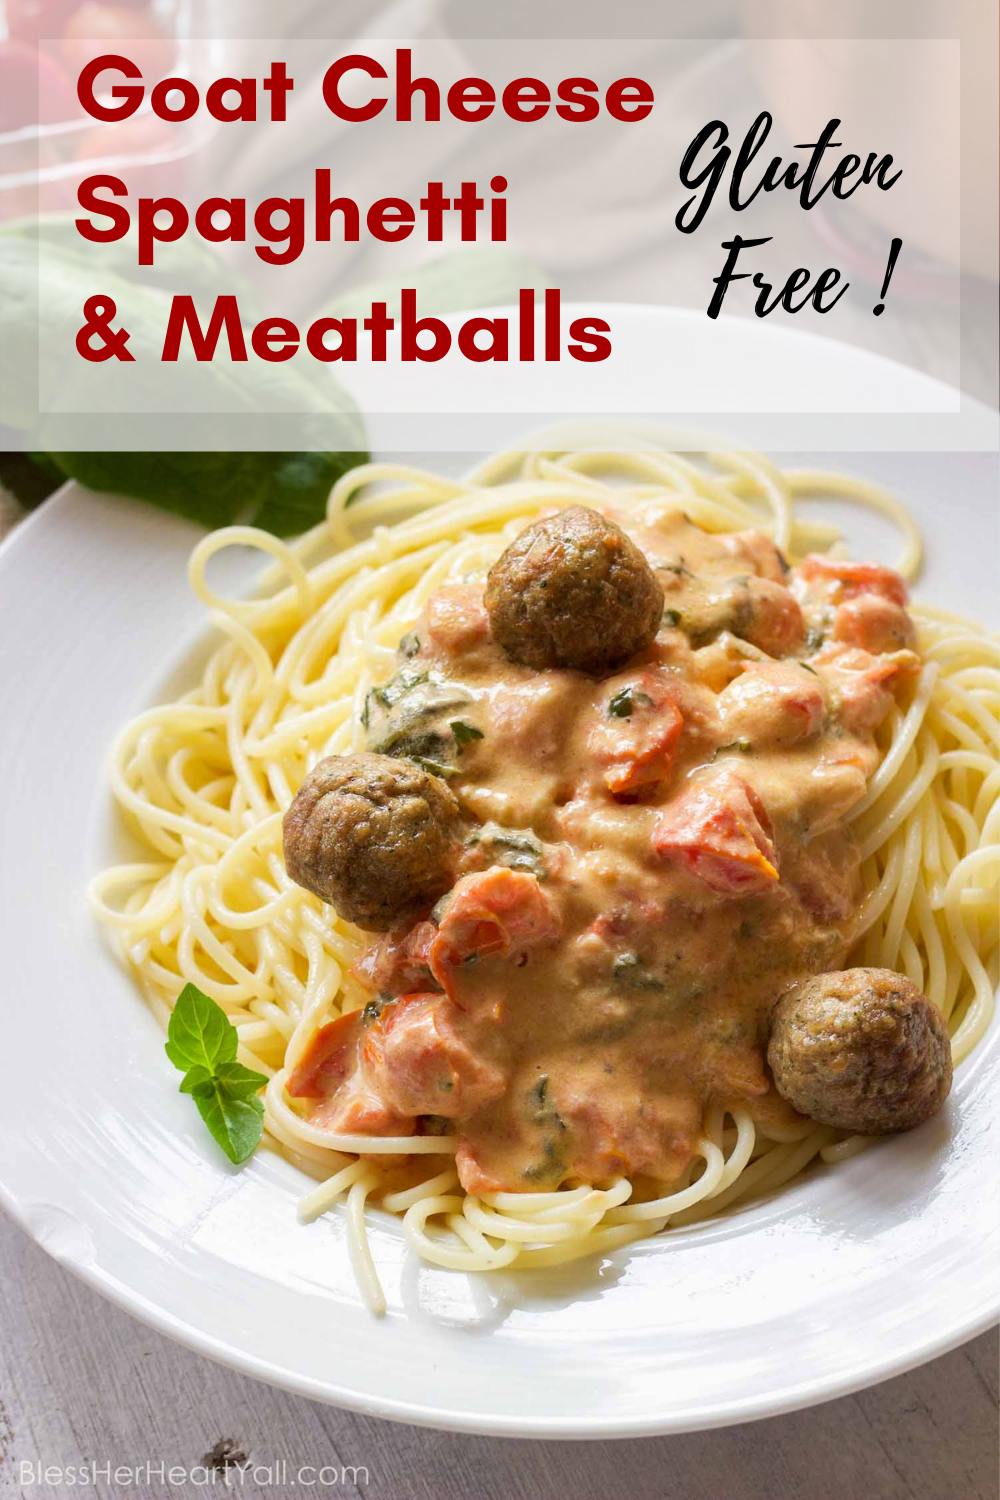 Easy Goat Cheese Spaghetti and Meatballs: Gourmet taste in just Minutes!